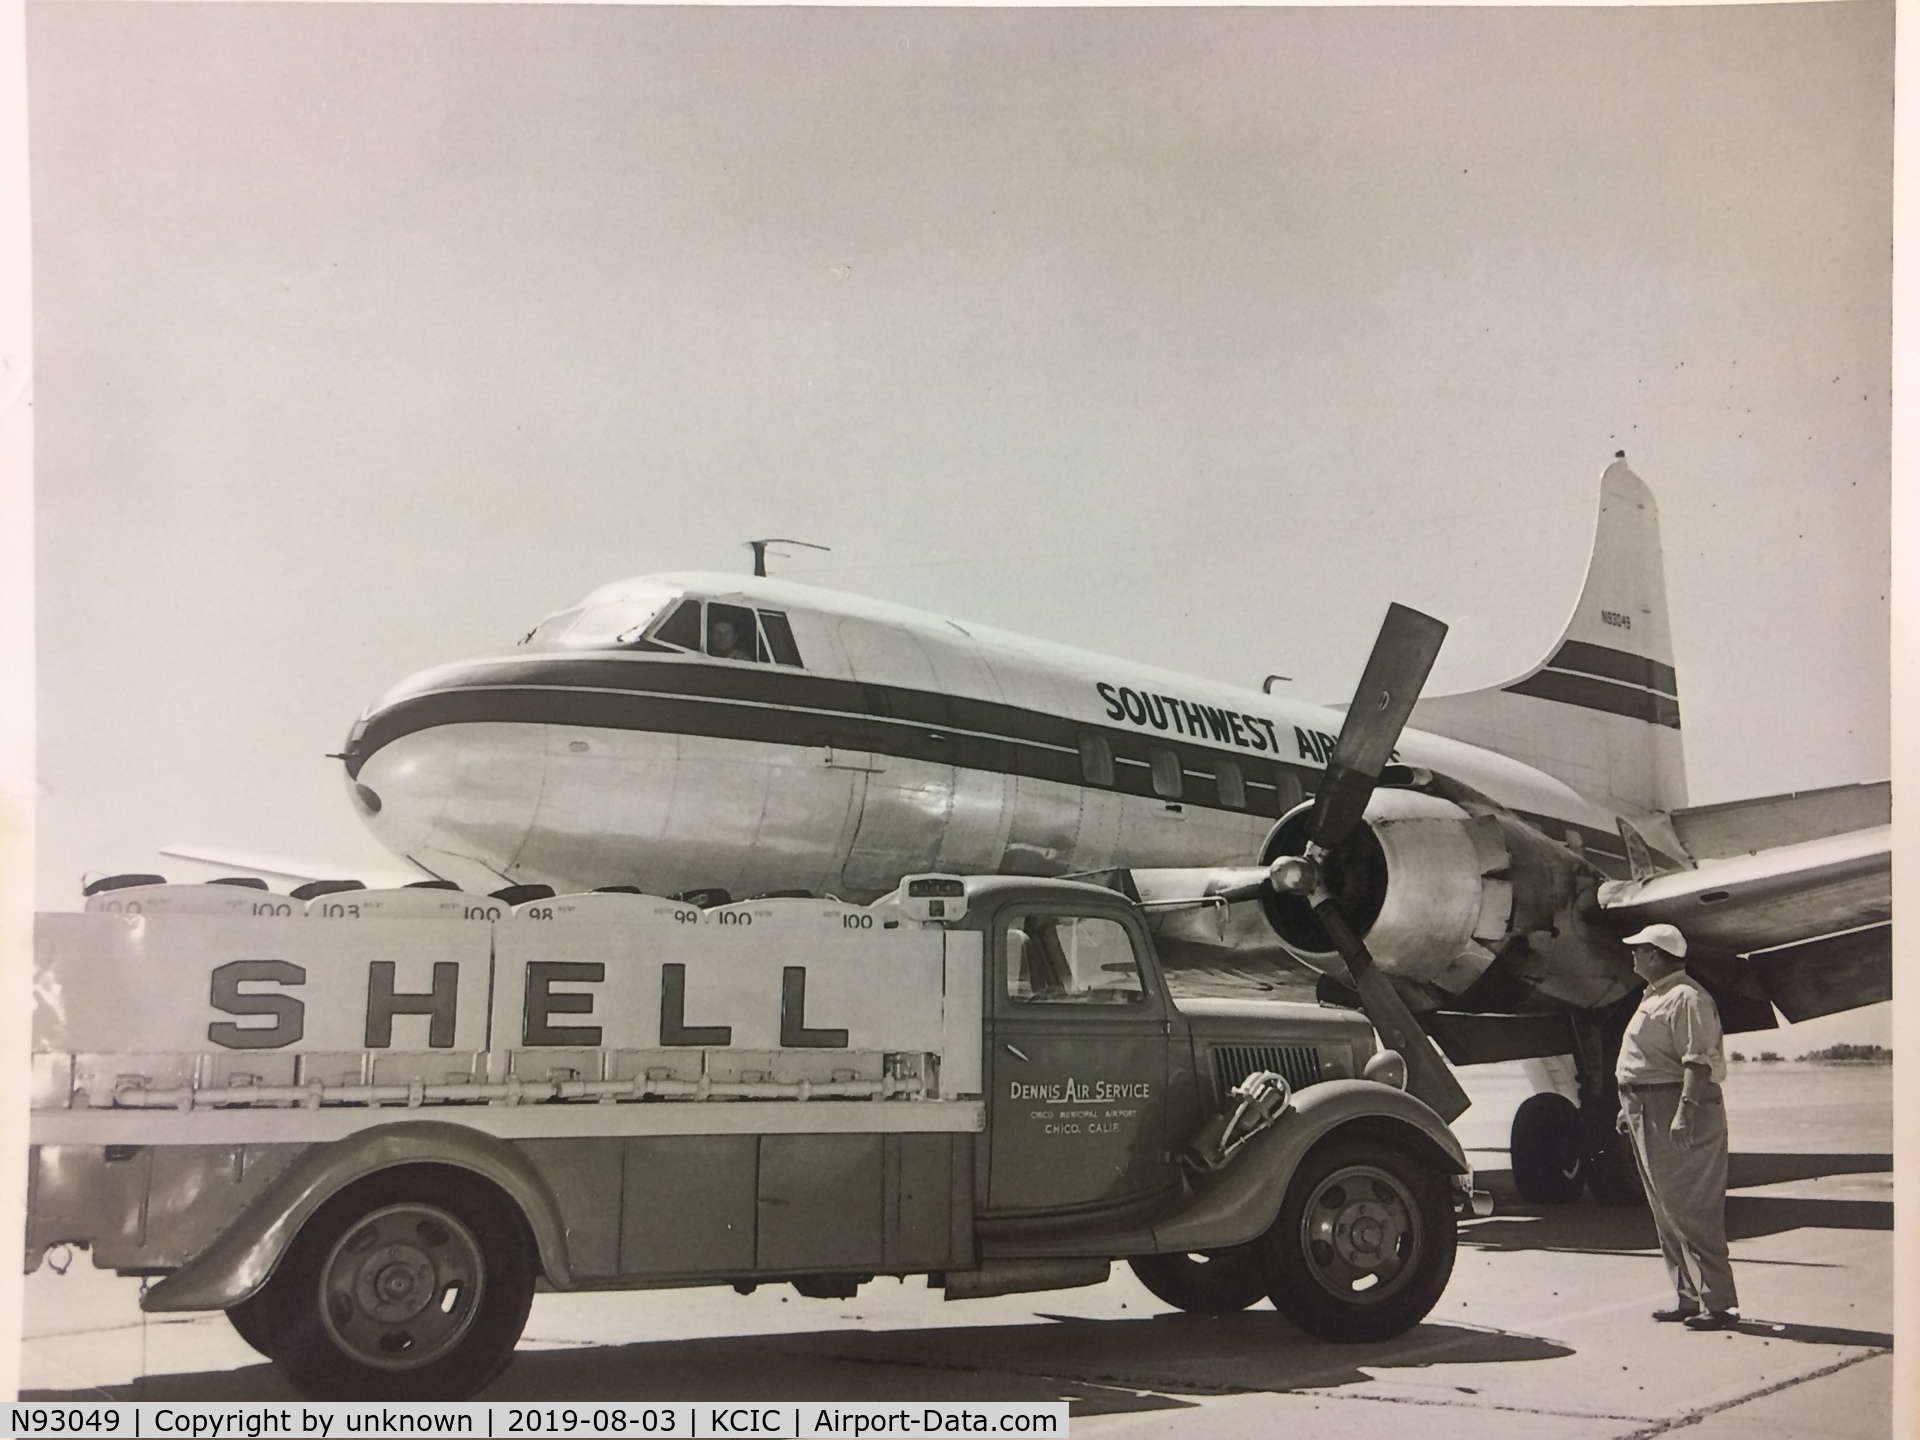 N93049, 1946 Martin 202 C/N 9132, Picture of N93049 in Chico California. Date unknown. Portly gentleman in picture is Herb Dennis, owner of Dennis Air service the FBO in Chico at the time. Picture courtesy of the Chico Air Museum.